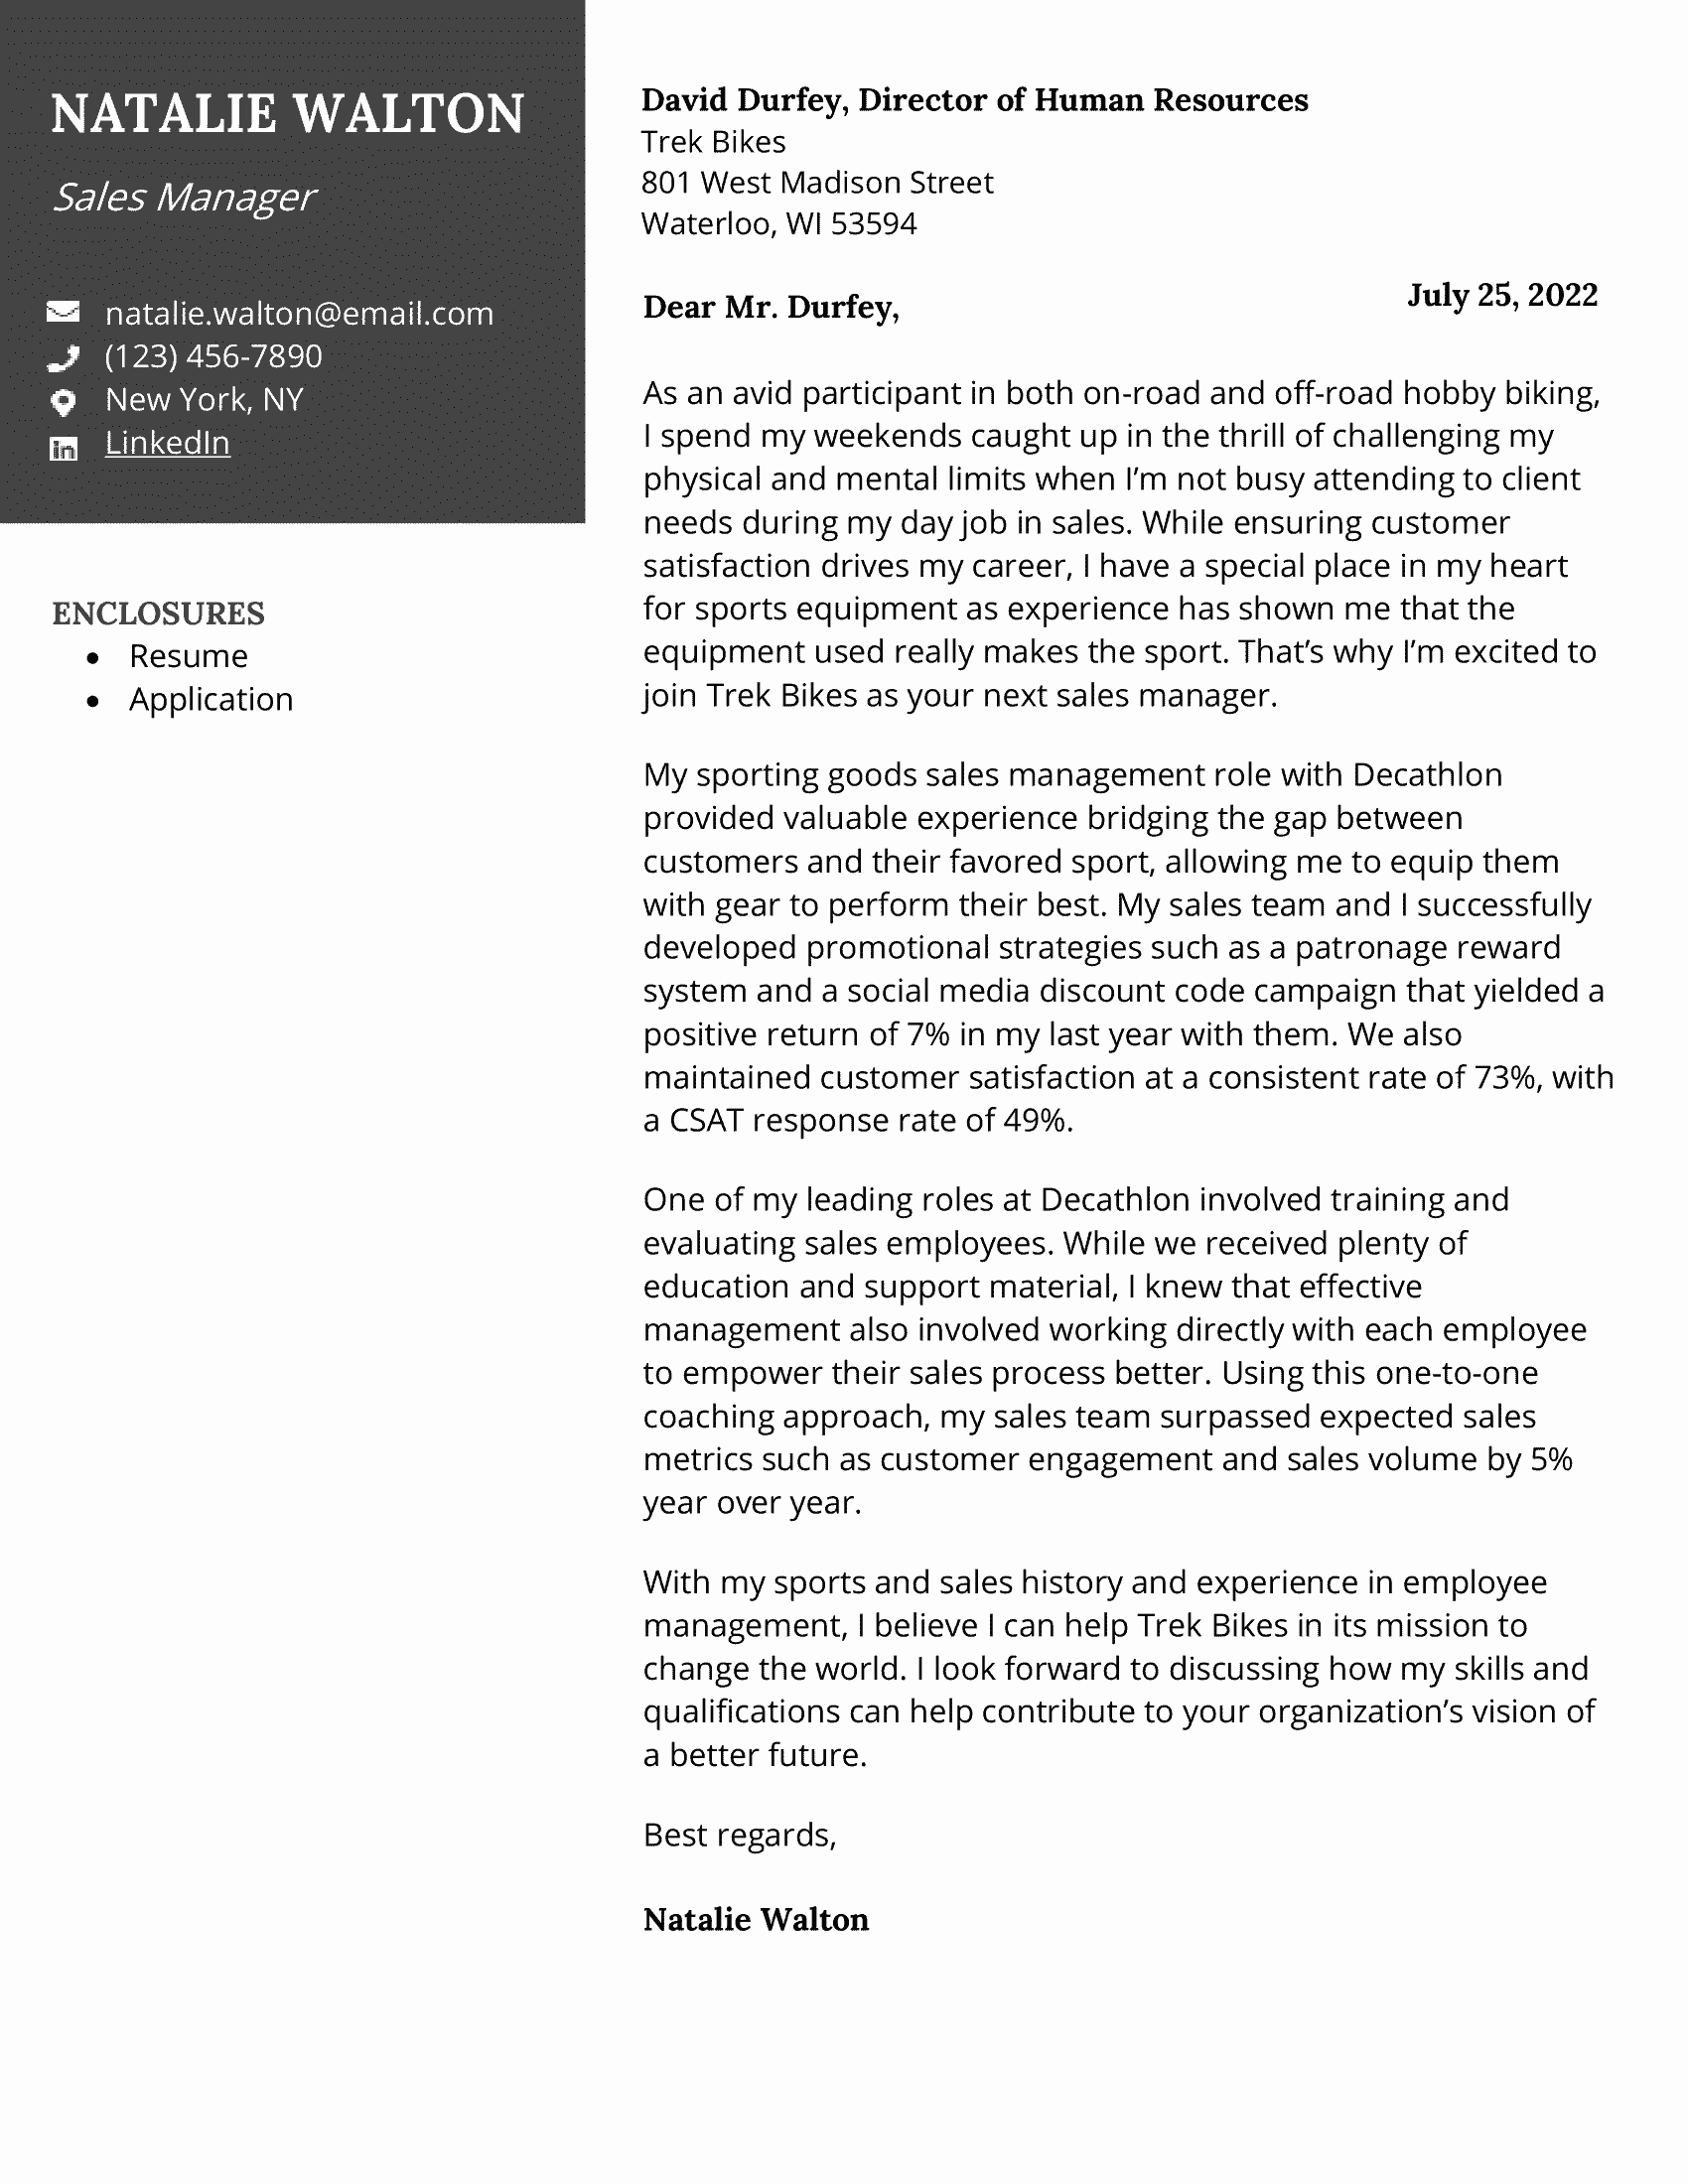 Sales manager cover letter with black contact header